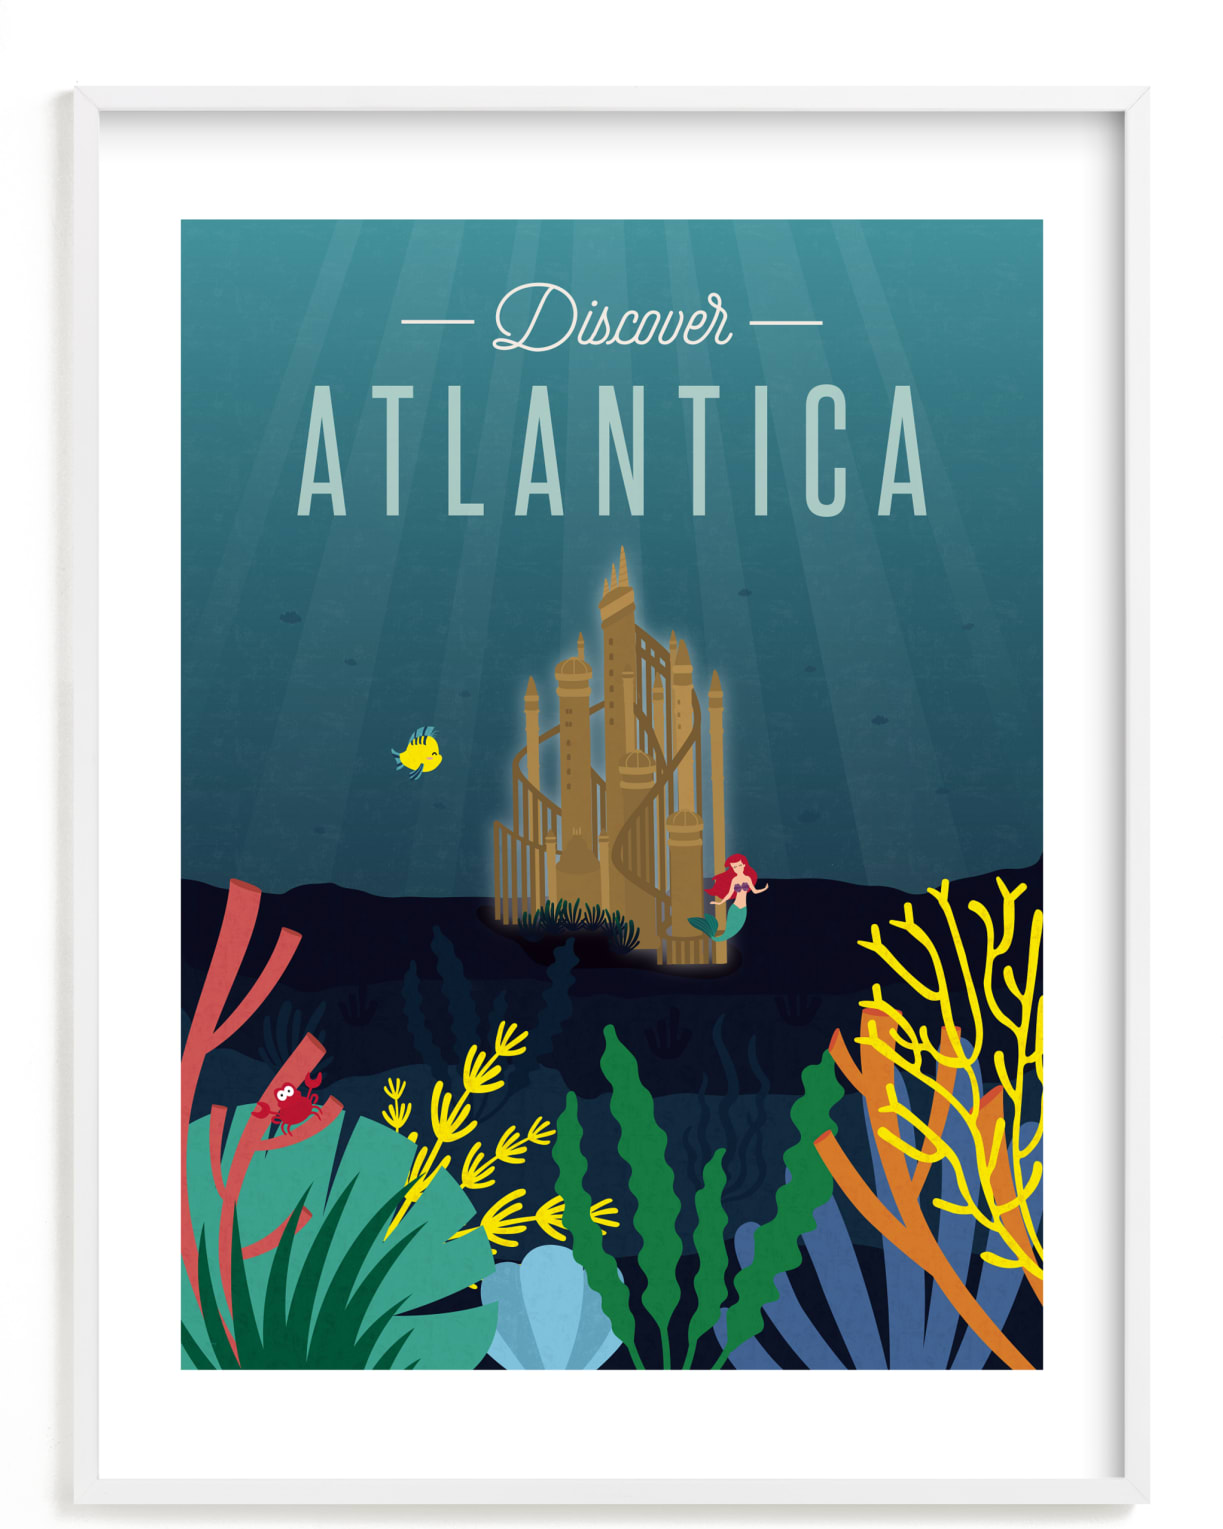 This is a blue disney art by Erica Krystek called Discover Atlantica from Disney's The Little Mermaid.